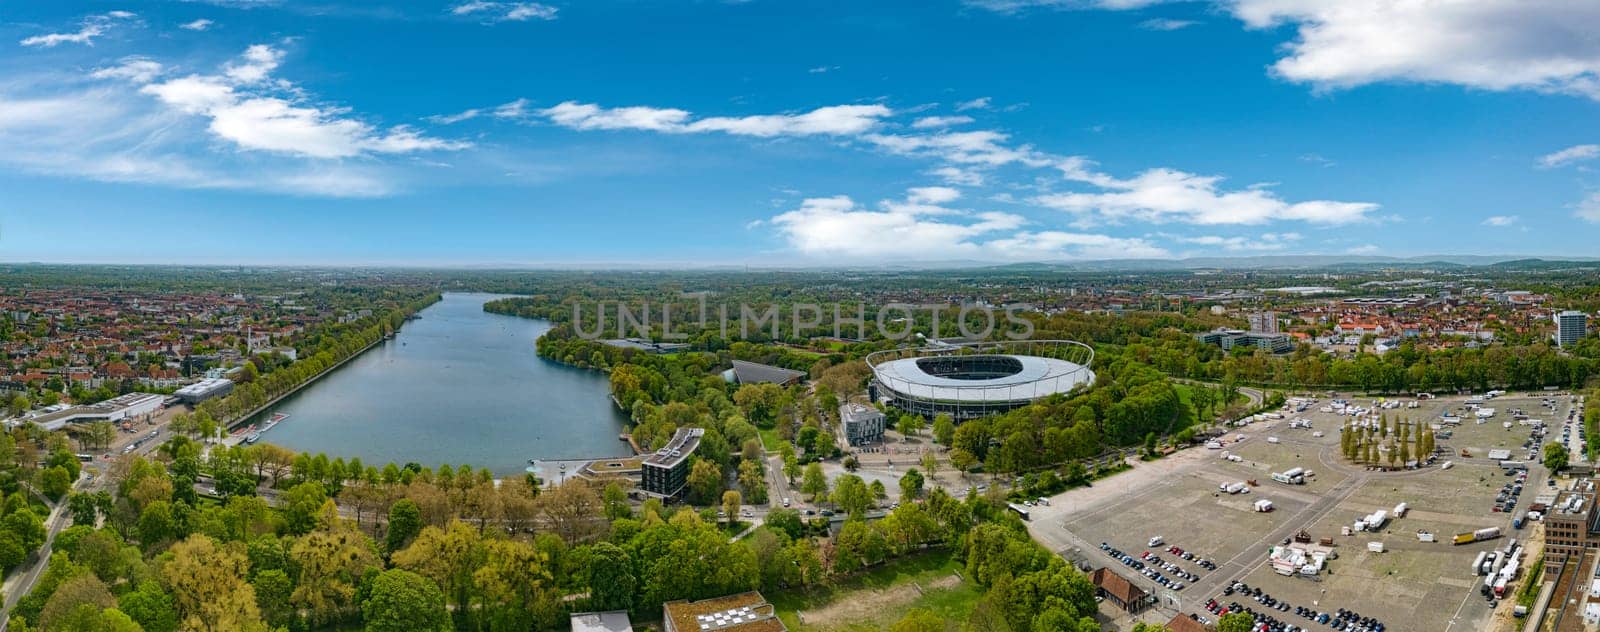 Aerial view of the Masch Lake in Hannover, Germany by mot1963